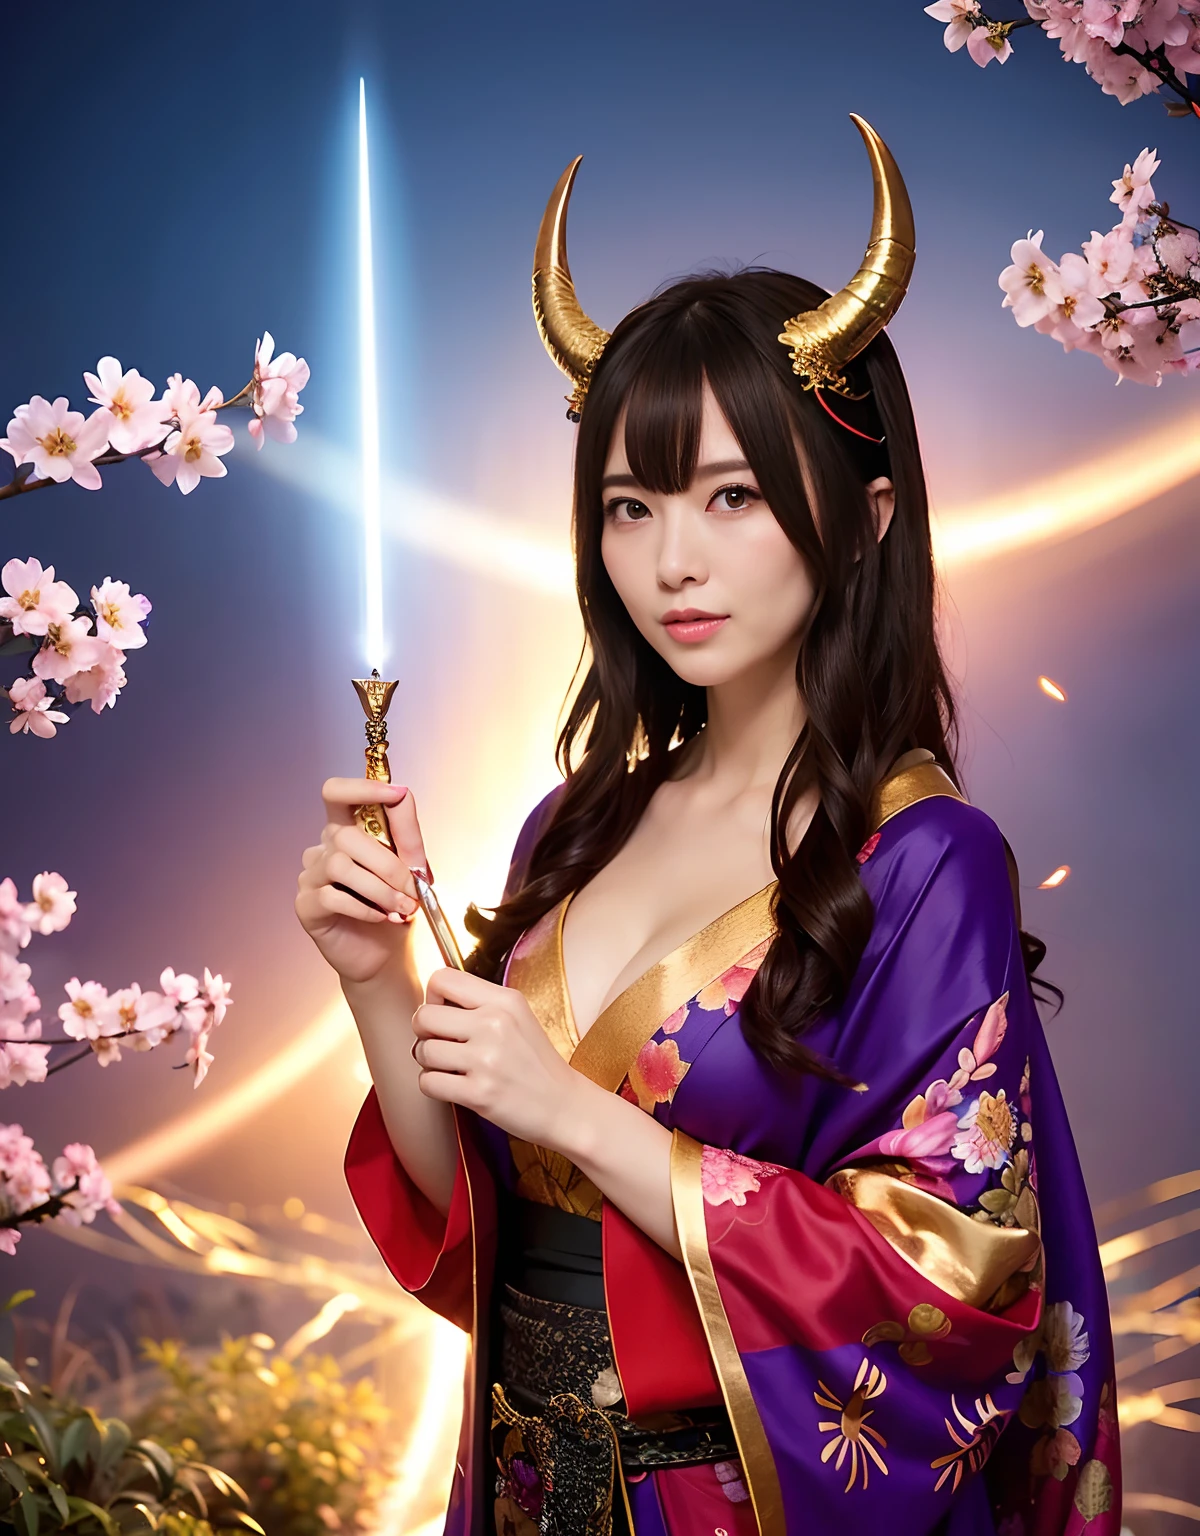 ((World of Darkness)),Professional , ​masterpiece、top-quality、photos realistic , depth of fields 、（sexypose）、(Background of cherry blossoms in full bloom),（Ultimate Beauty）、A dark-haired、（)、（Kimono with beautiful pattern）、（Night background）、（（））,(Wear a beautiful kimono),（Wear a beautiful kimono with colorful floral patterns）、Jewel Gold Weapon、Particles of light),(Wearing a wizard's hat）、Gorgeous gold weapons ,Skeleton population、（（ Gorgeous Dragon Sword）） , （a dark night）,,（maikurobikini） 、（（Black Haired Beautiful Girl））、（Castle background）、（demonic wings）、（（Gangle's forest background））、Beautiful Caucasian beauty、１a person、dynamic ungle,(((Two devil's horns on the head)))、Smaller head、Idle Smile、Thin and beautiful female handystical expression、Light Effects、intense fighting、Wind-effect、magic circles、With the legendary magic wand、Dragon's tail、